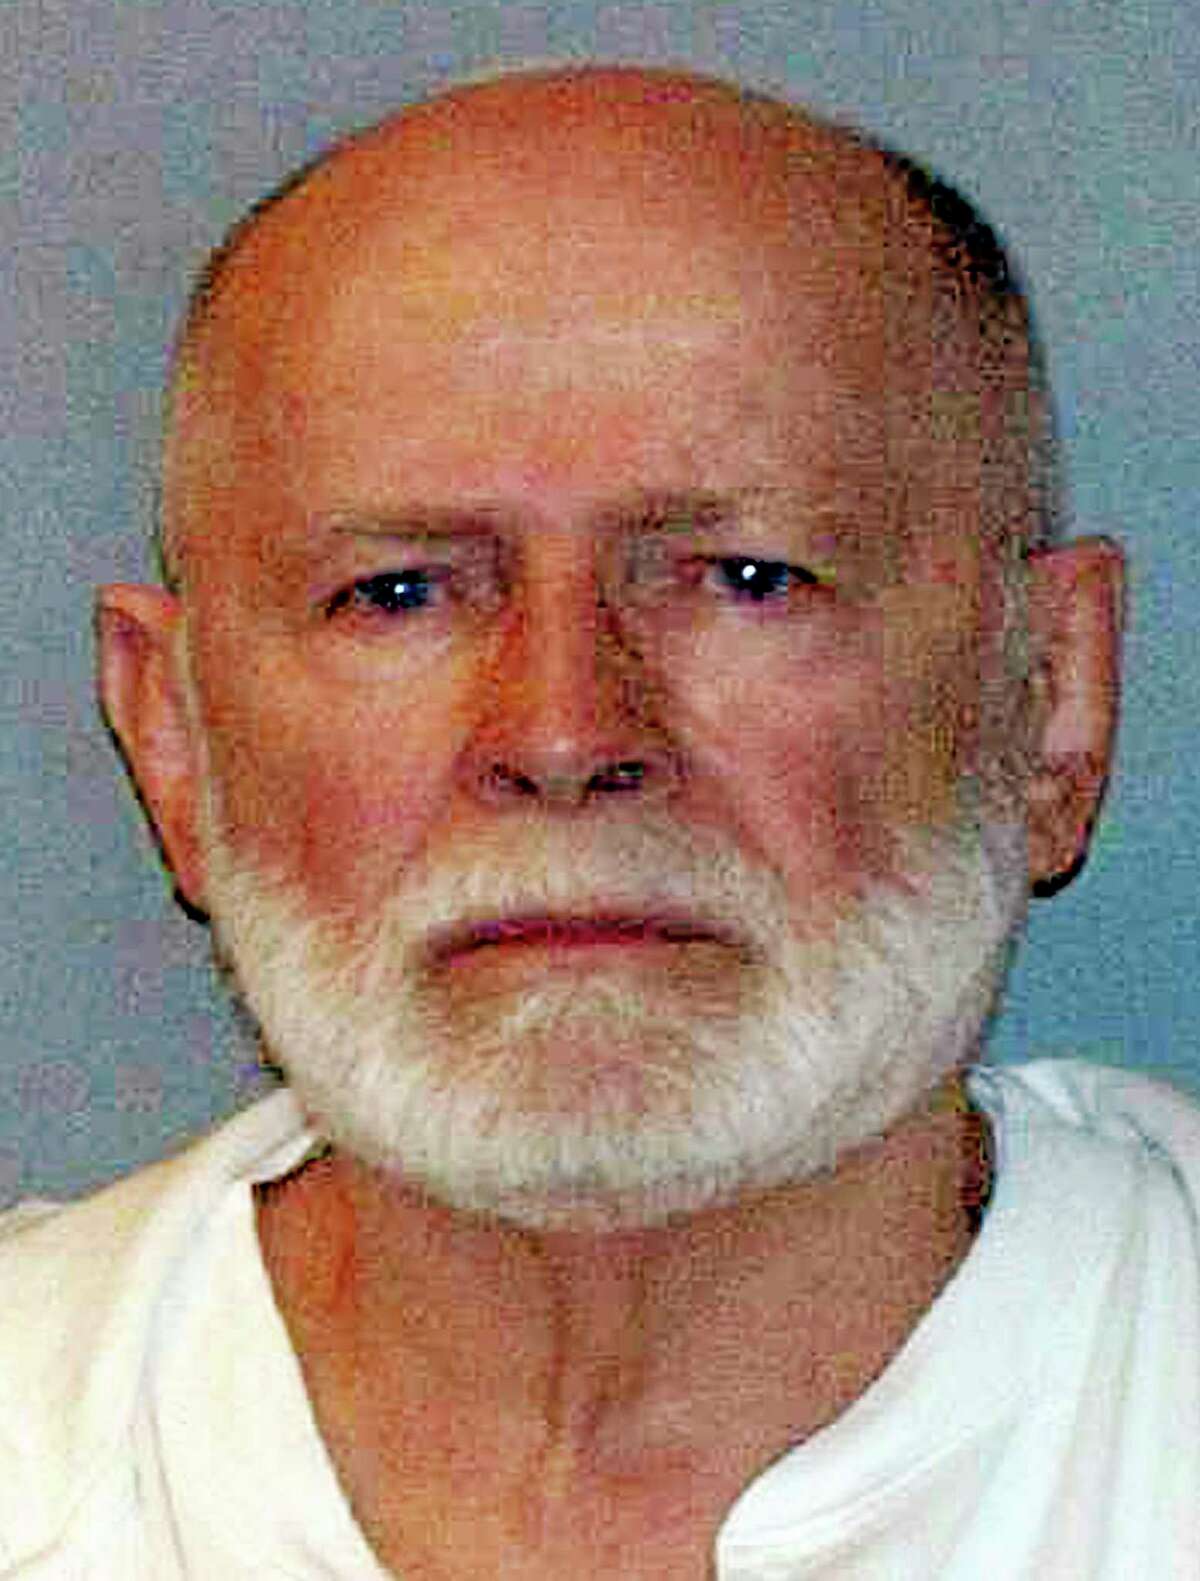 FILE - This June 23, 2011 file photo shows a booking photo provided by the U.S. Marshals Service shows James “Whitey” Bulger, captured in Santa Monica, Calif., after 16 years on the run.